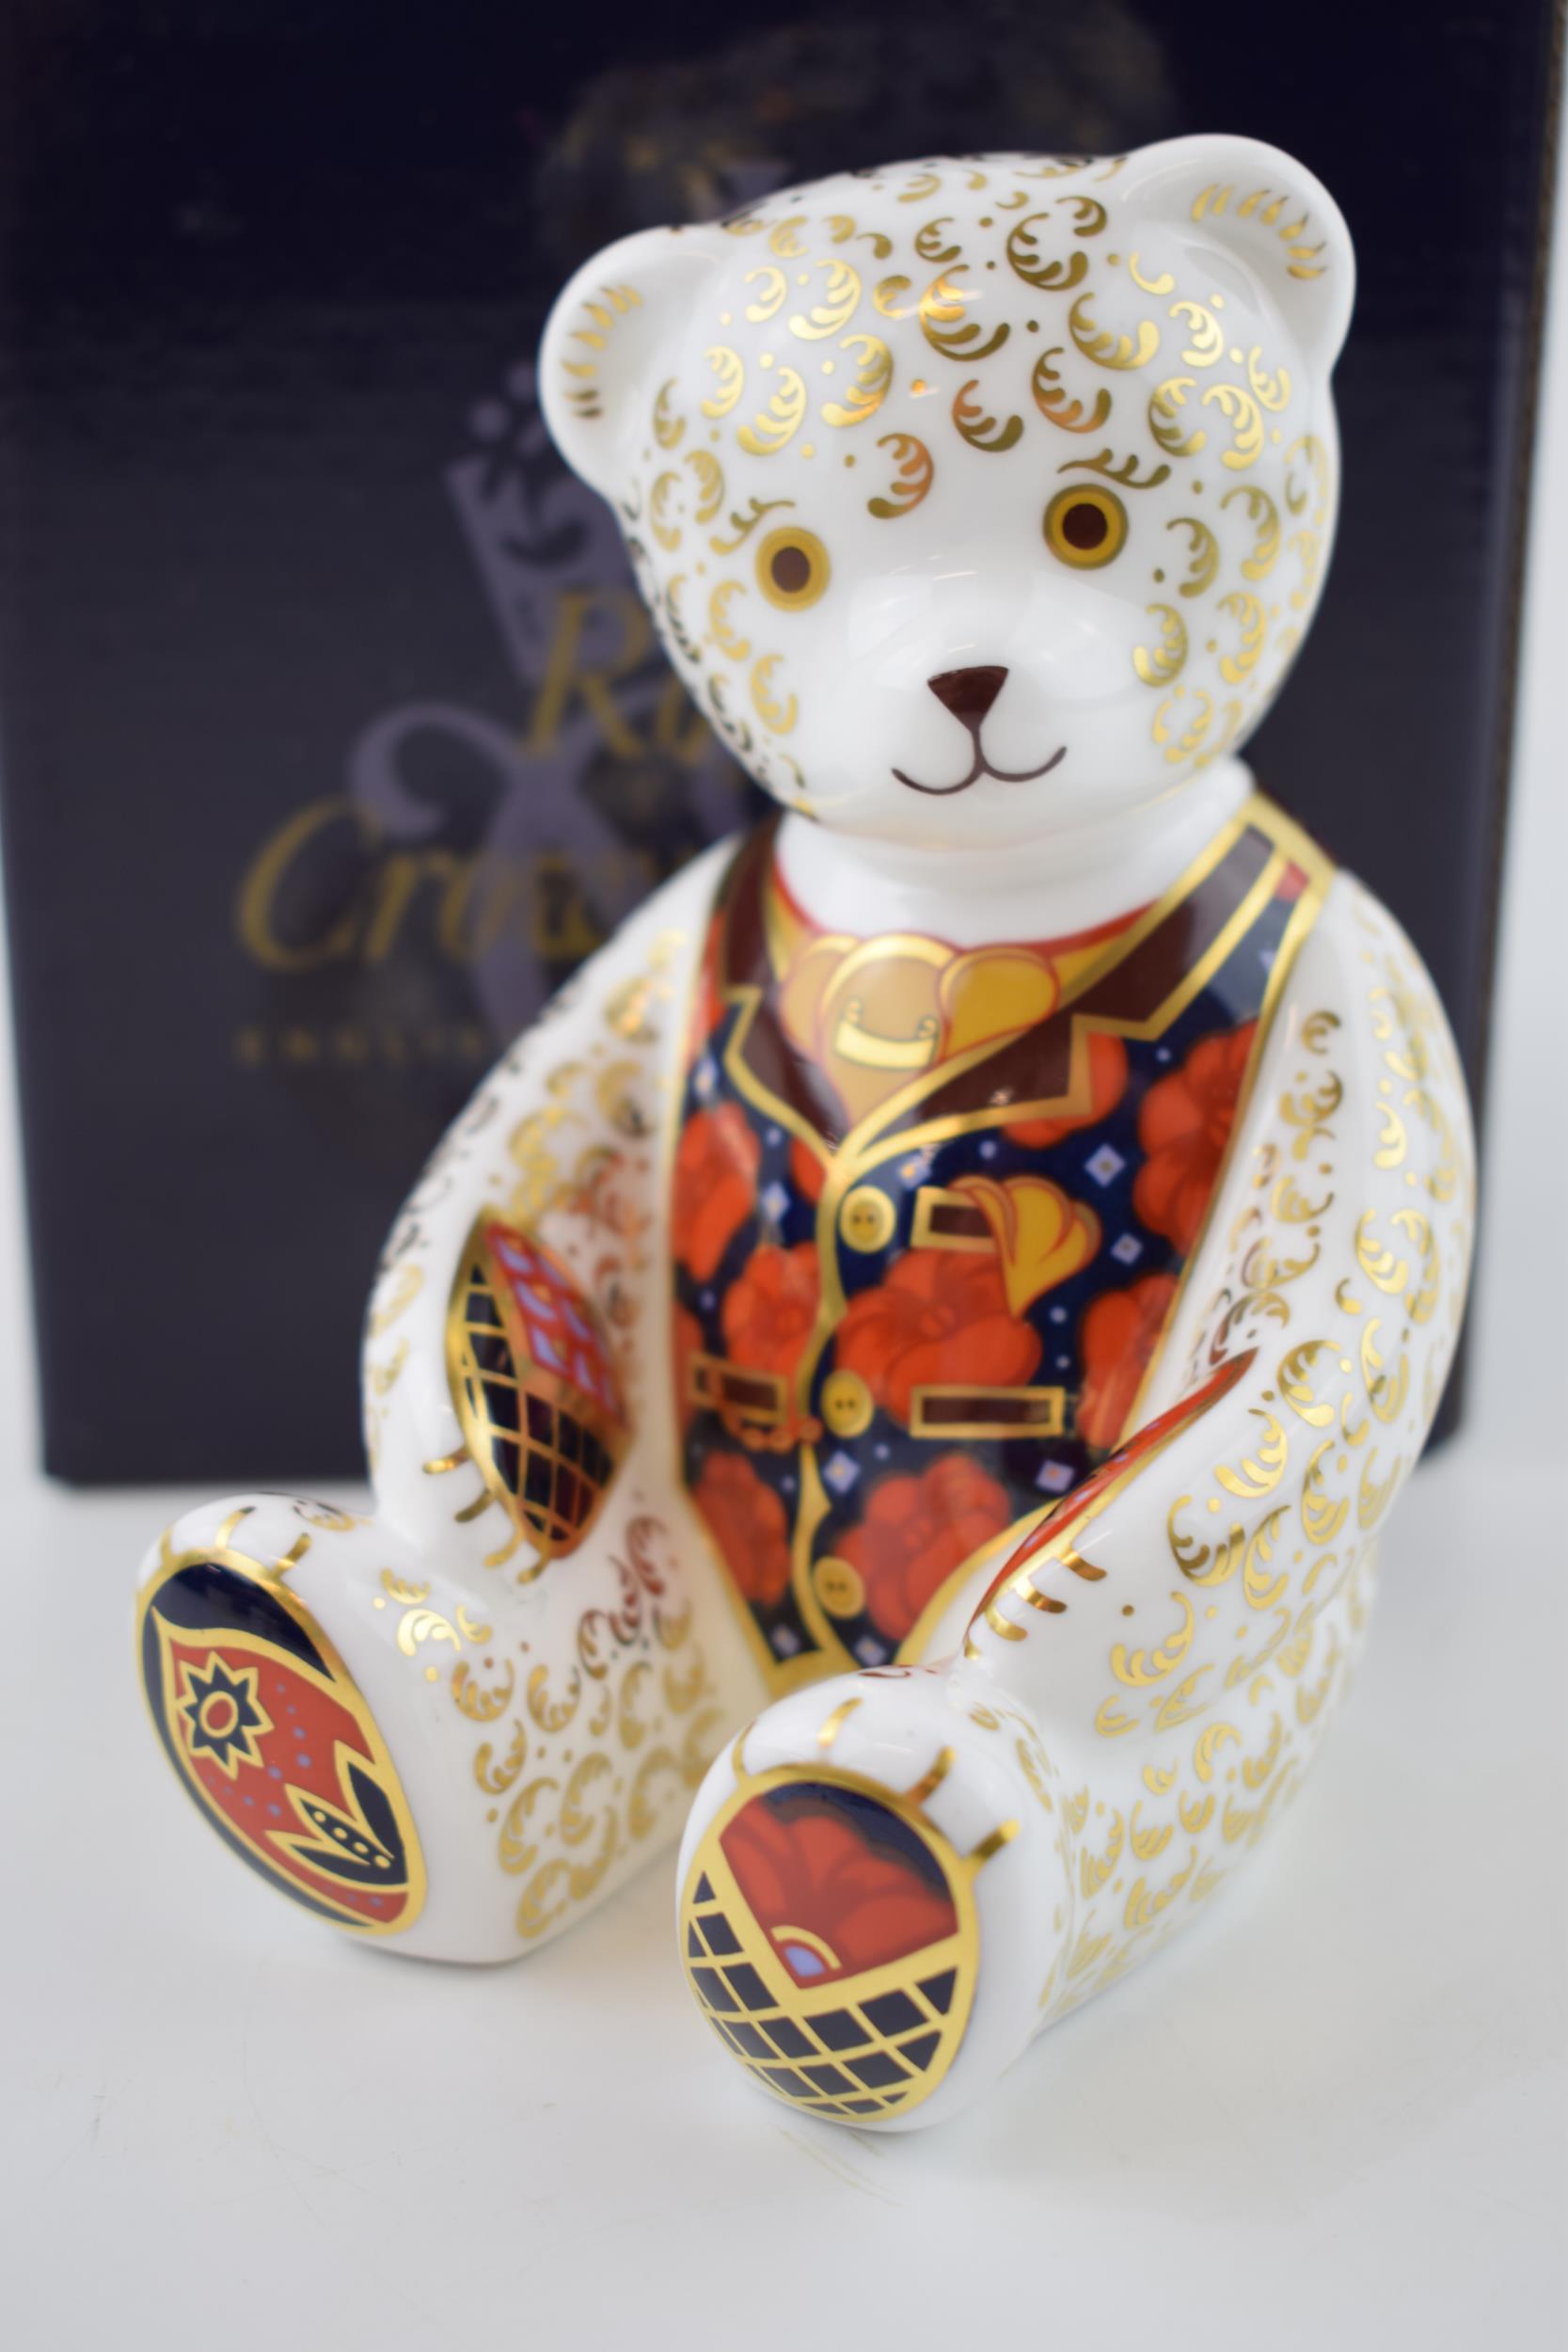 Royal Crown Derby Debonair Bear paperweight, 12cm, an exclusive for the Royal Crown Derby Collectors